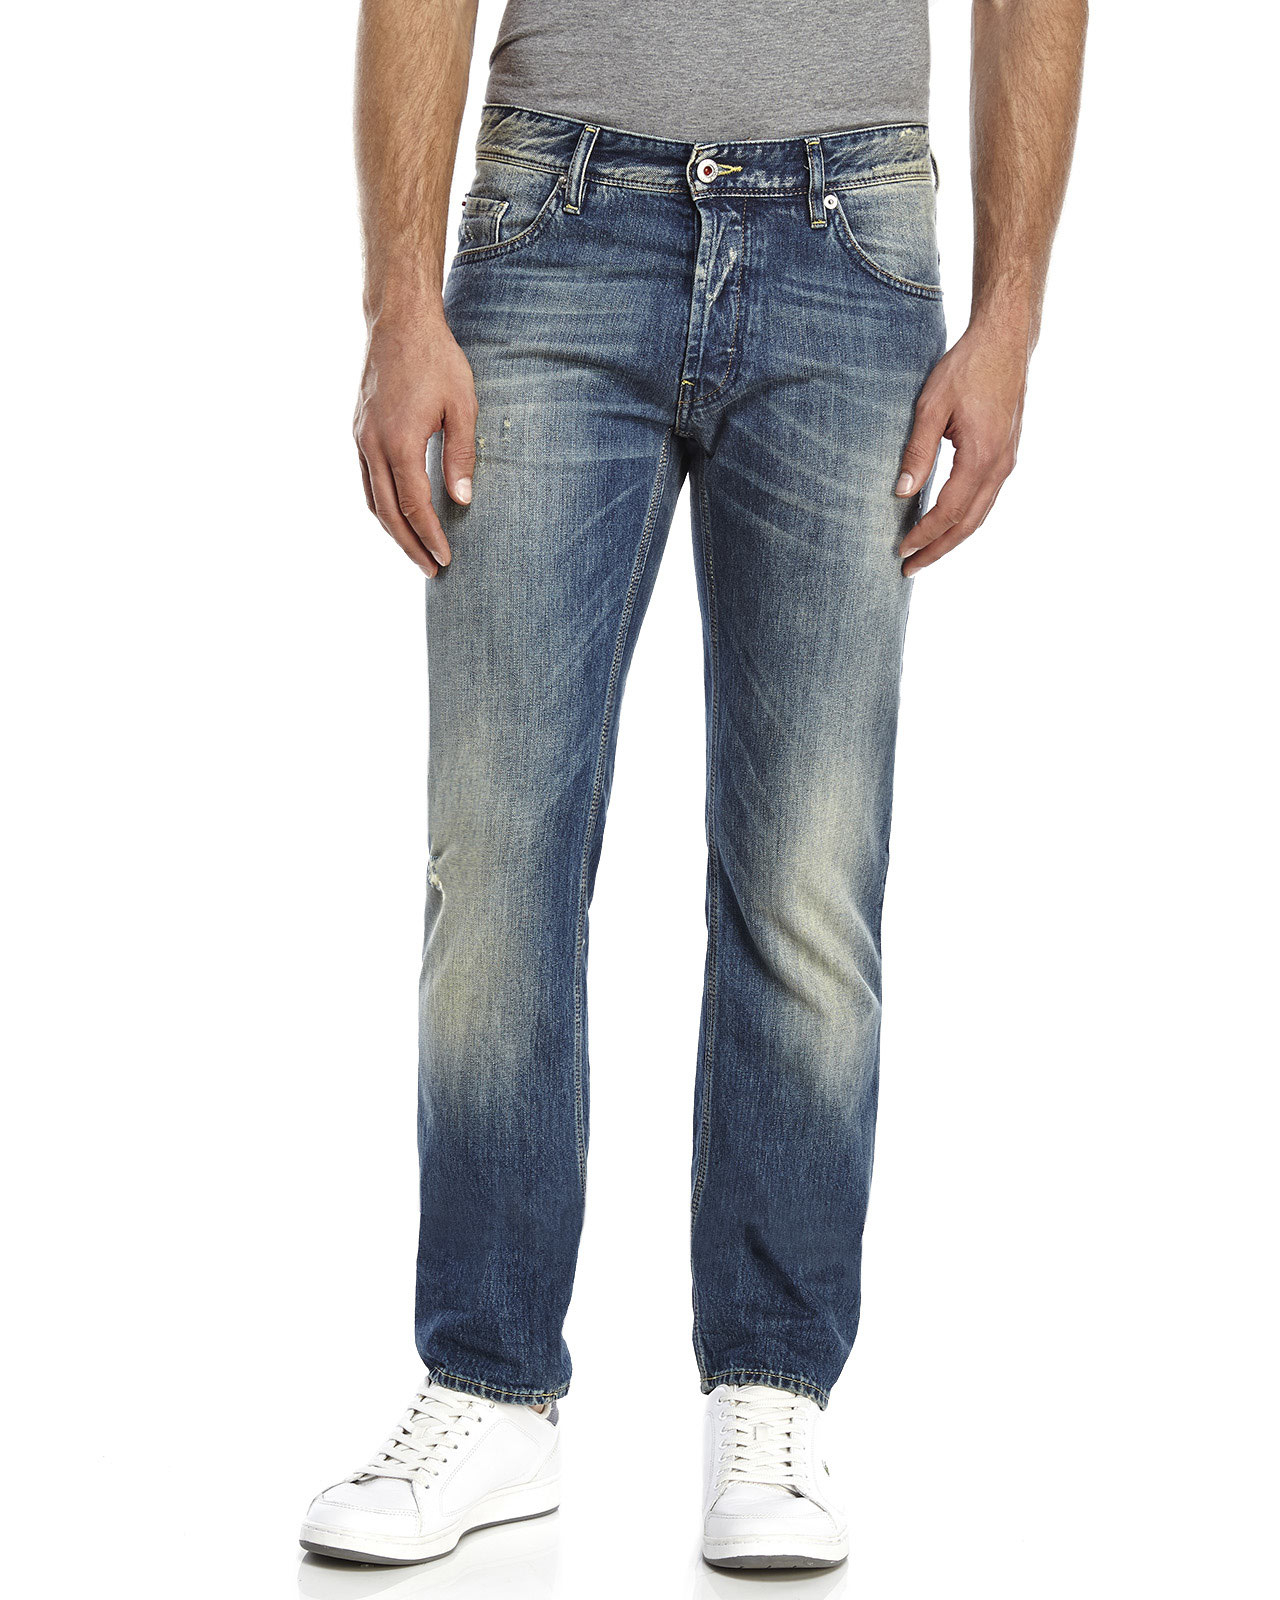 Lyst - Love Moschino Sandblasted Jeans in Blue for Men